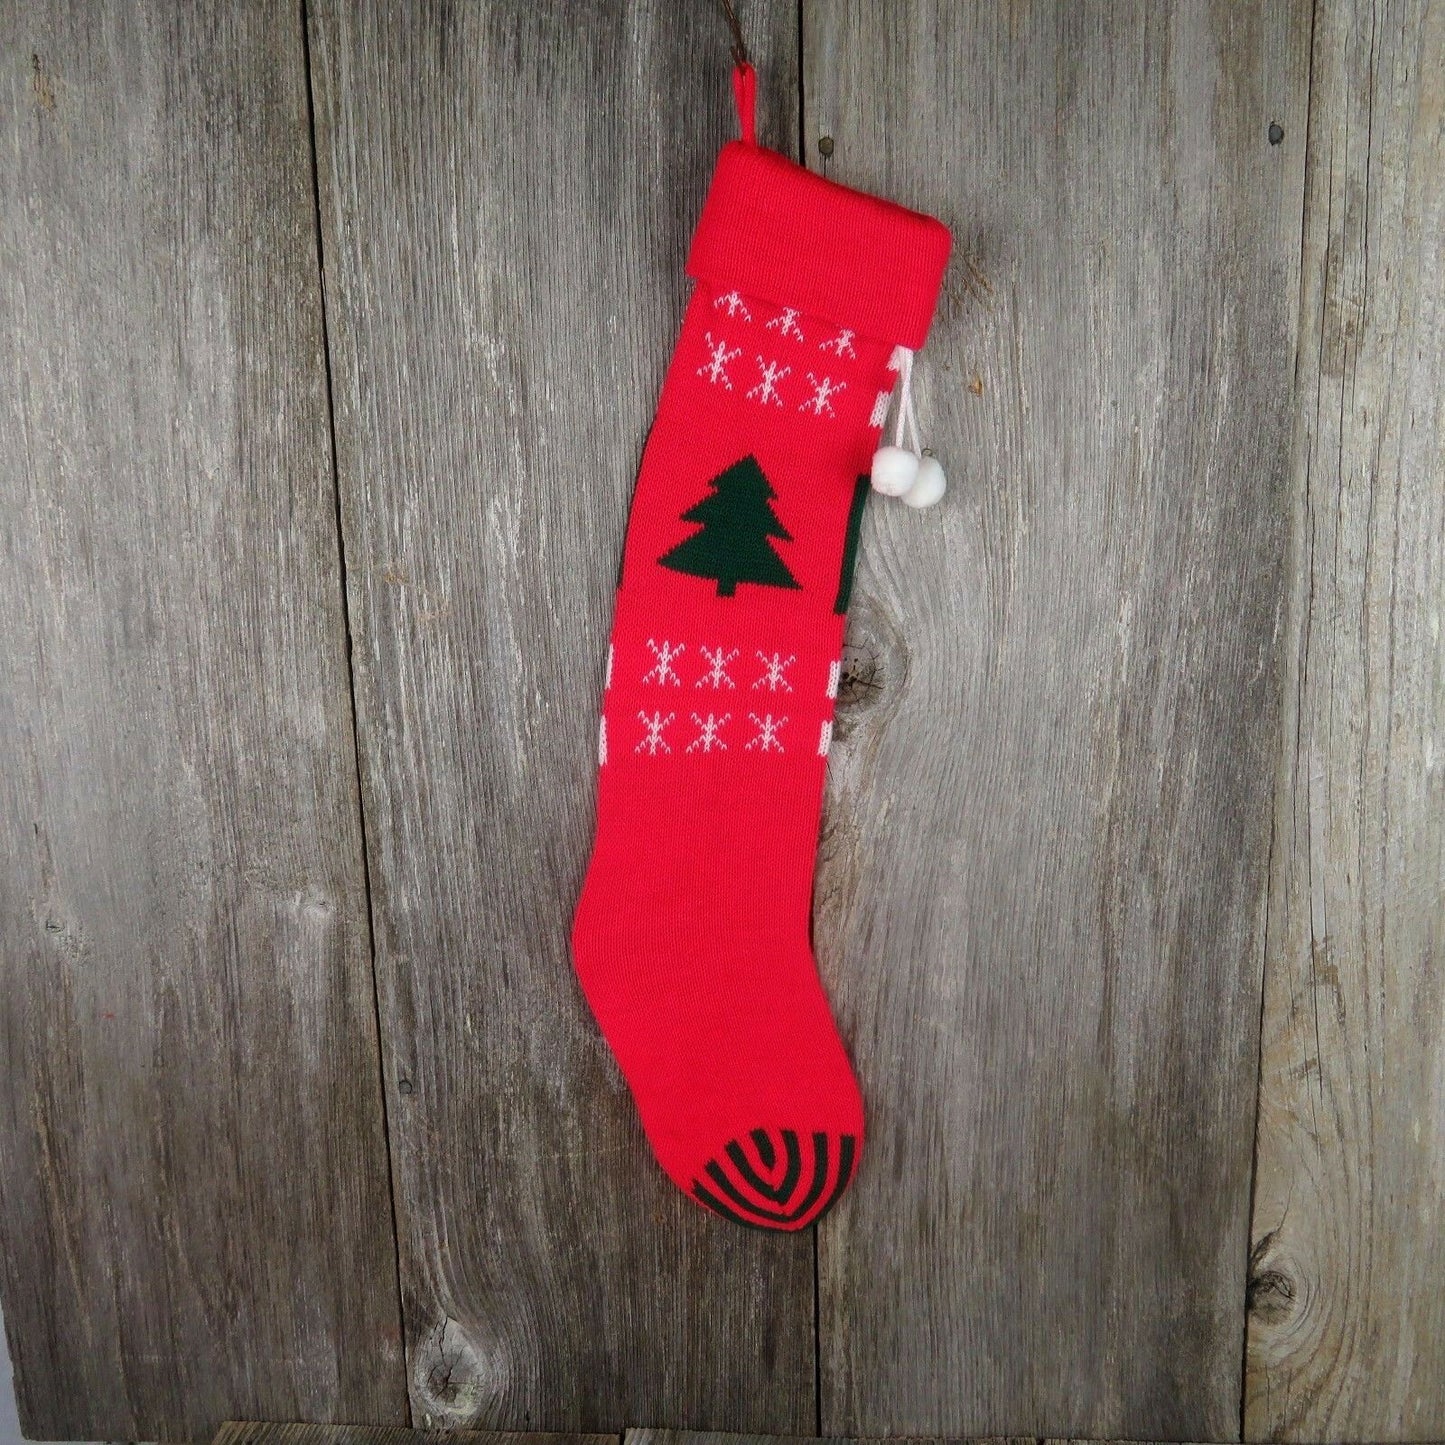 Vintage Christmas Tree Stocking Knitted Knit Green Red Long Snowflakes ST1 - At Grandma's Table